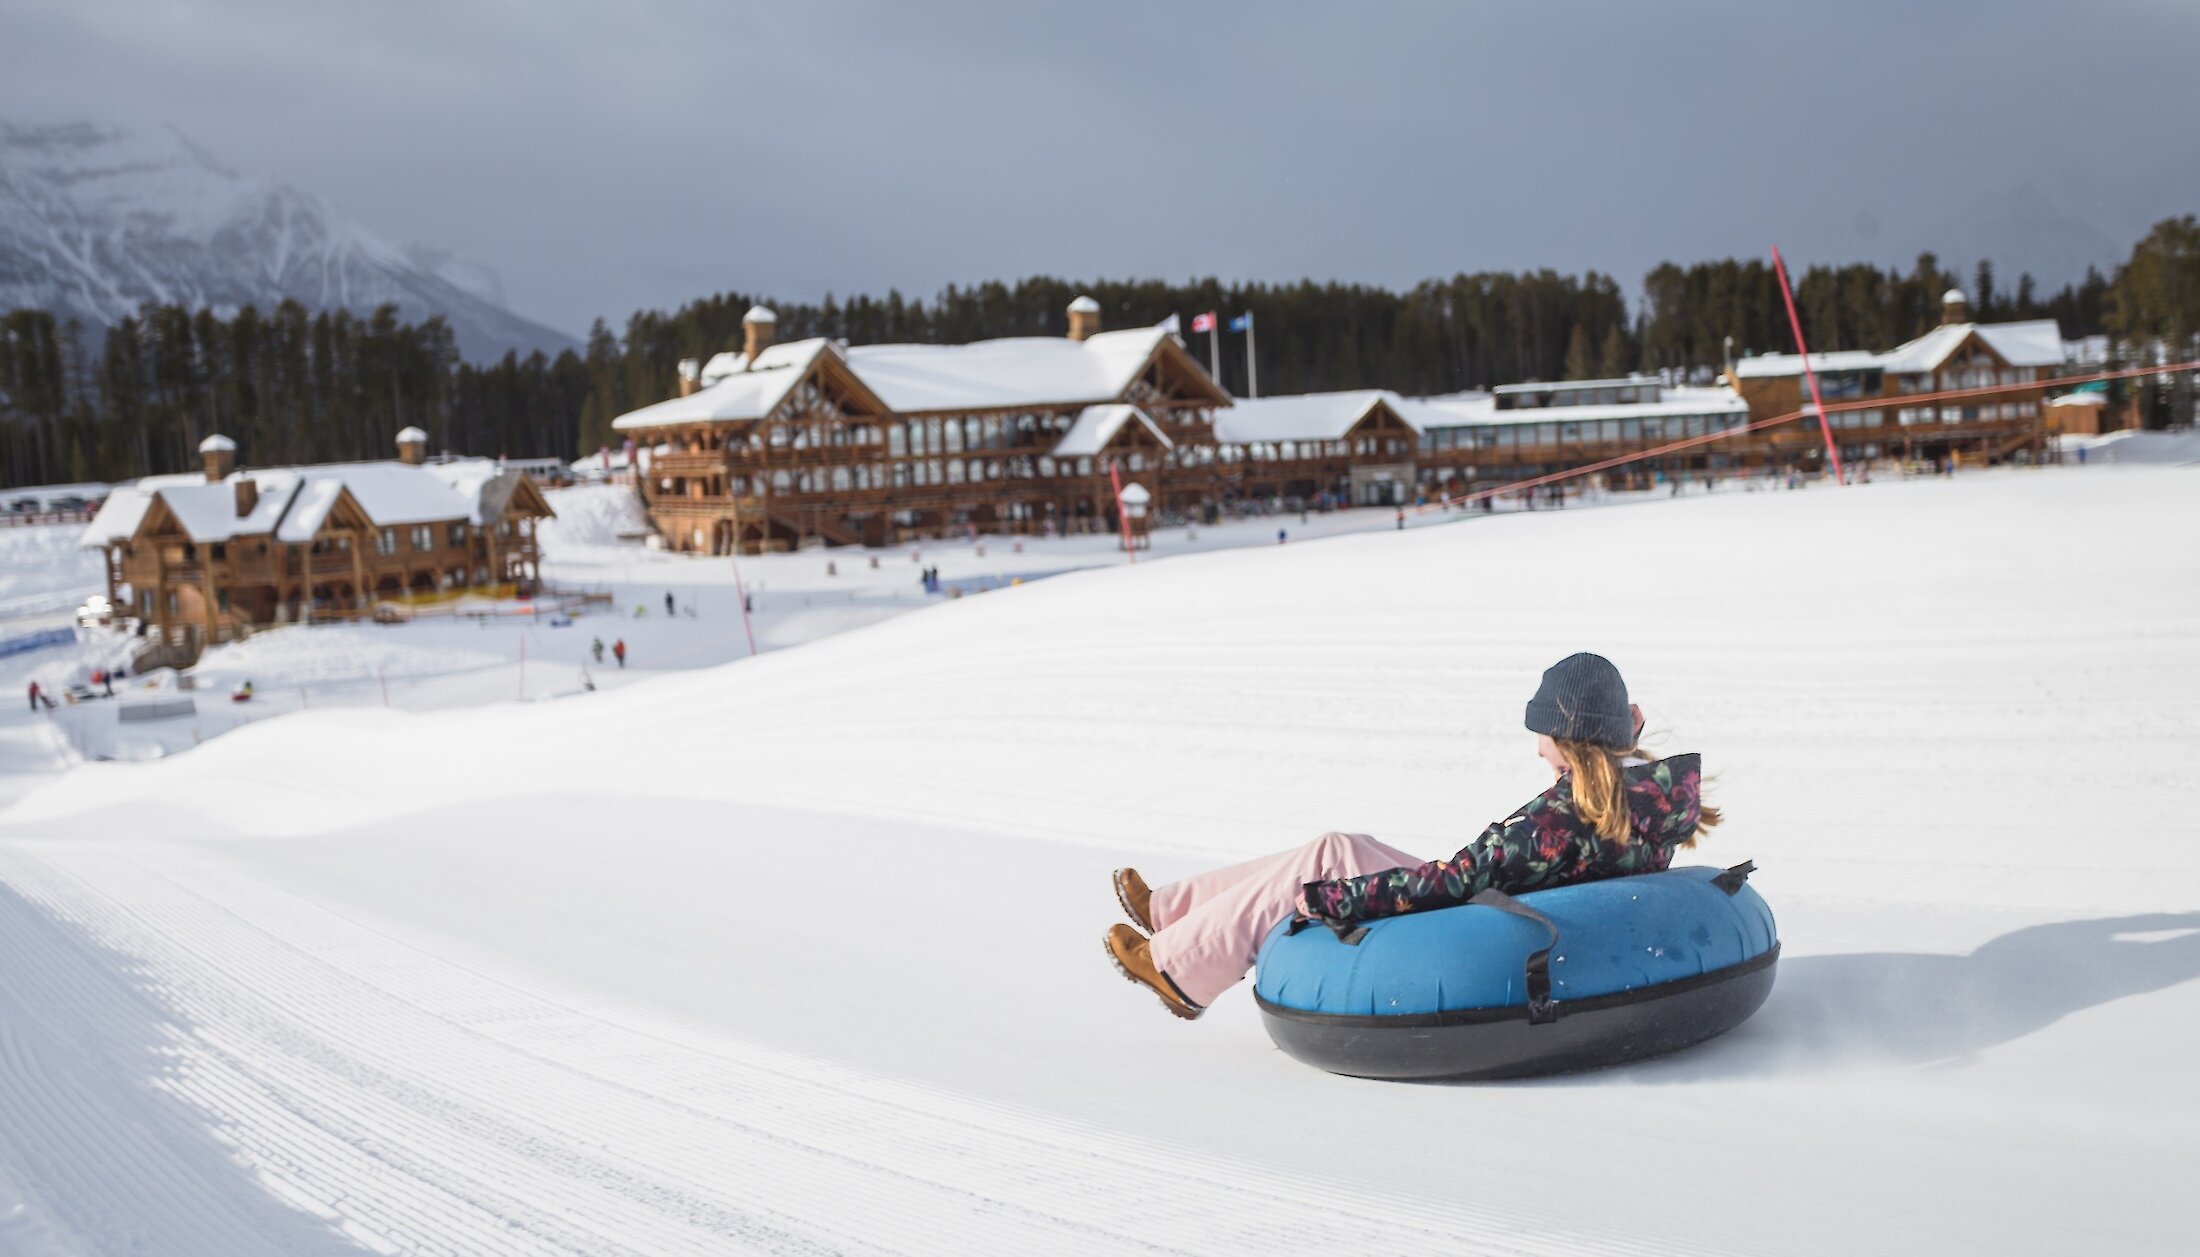 Snow tubing with the view of the Whiskey Jack Lodge at Lake Louise Ski Resort